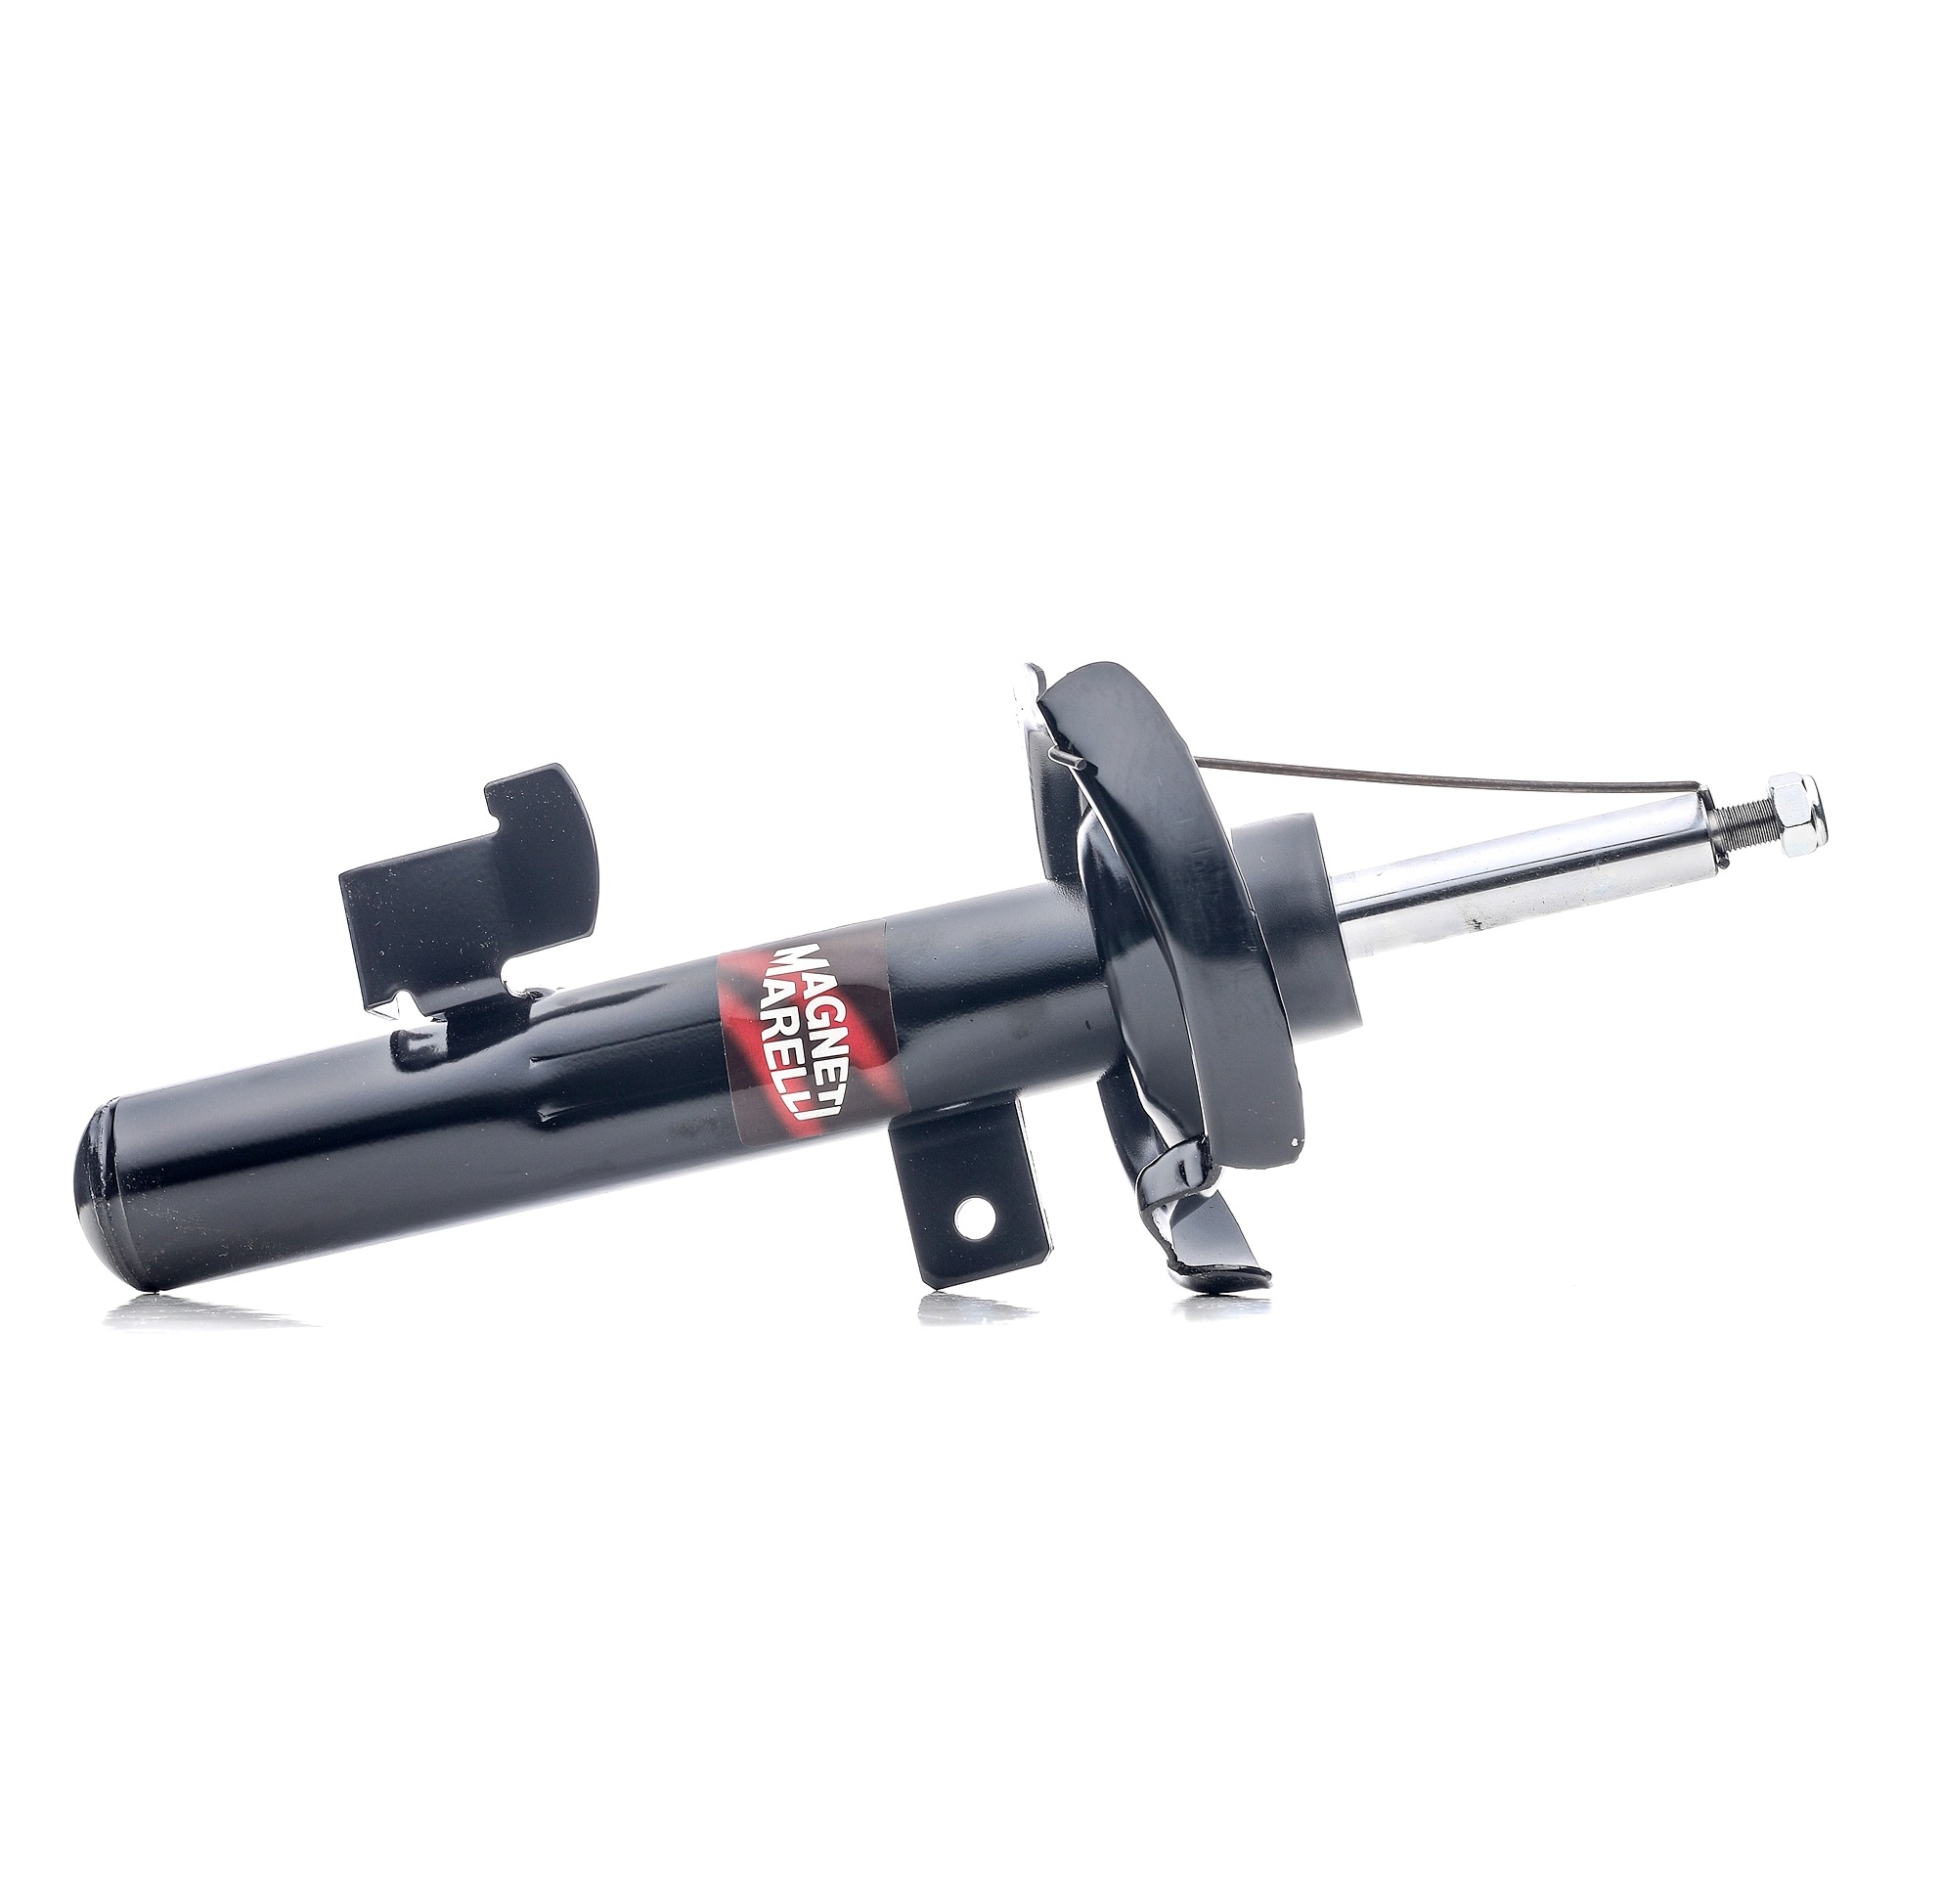 MAGNETI MARELLI 351384070200 Shock absorber Front Axle Left, Gas Pressure, Twin-Tube, Suspension Strut, Top pin